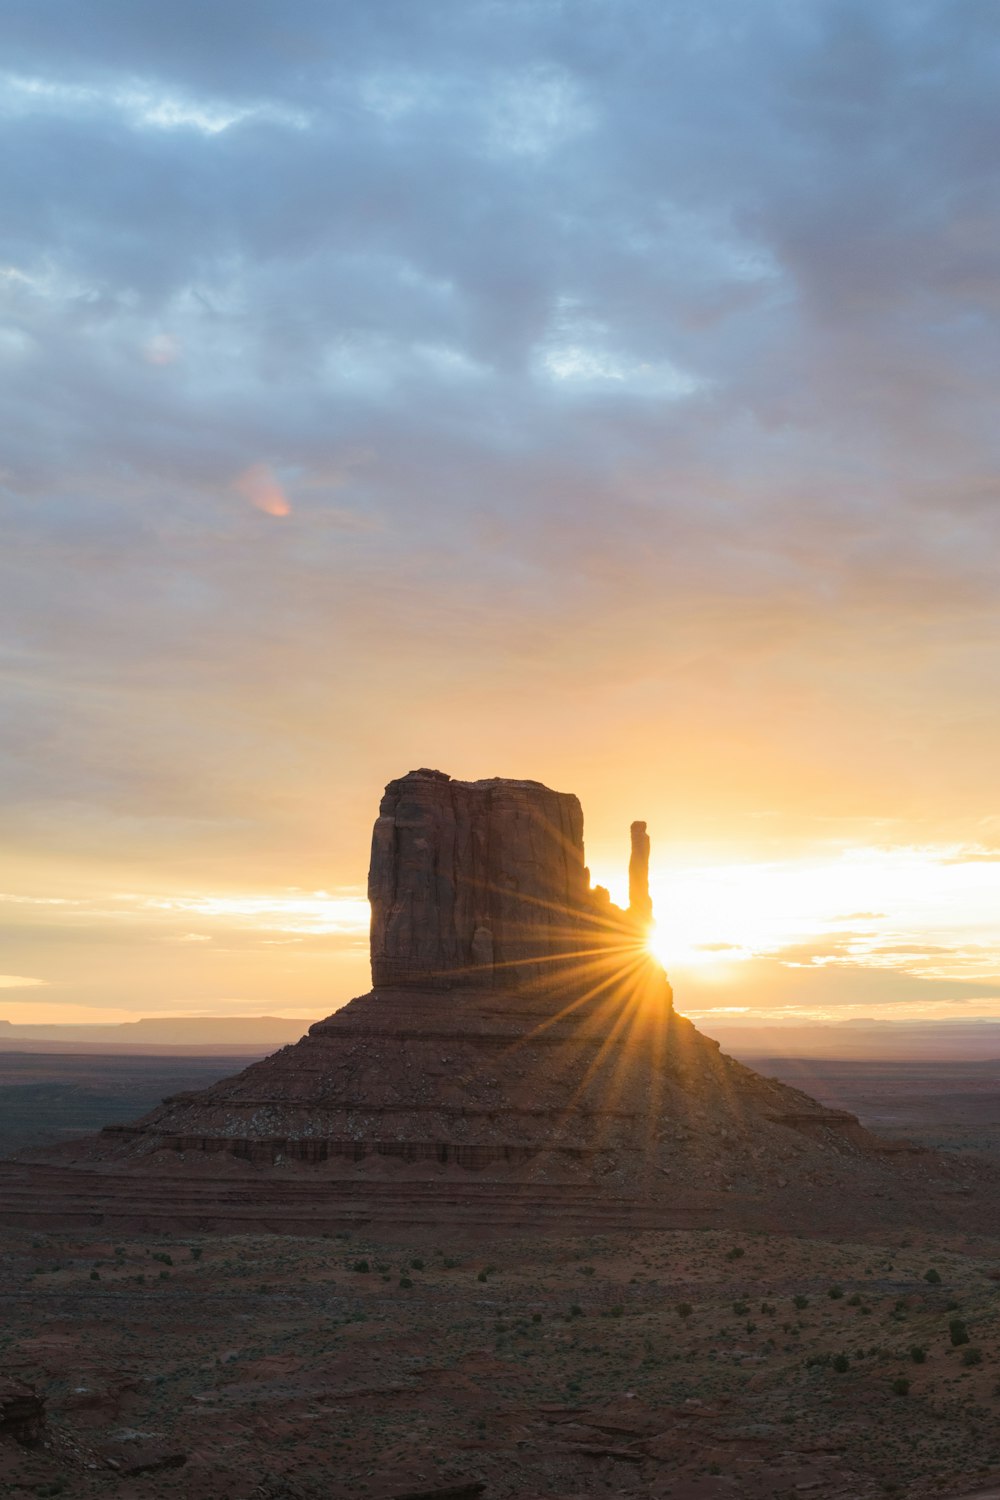 the sun is setting behind a large rock formation